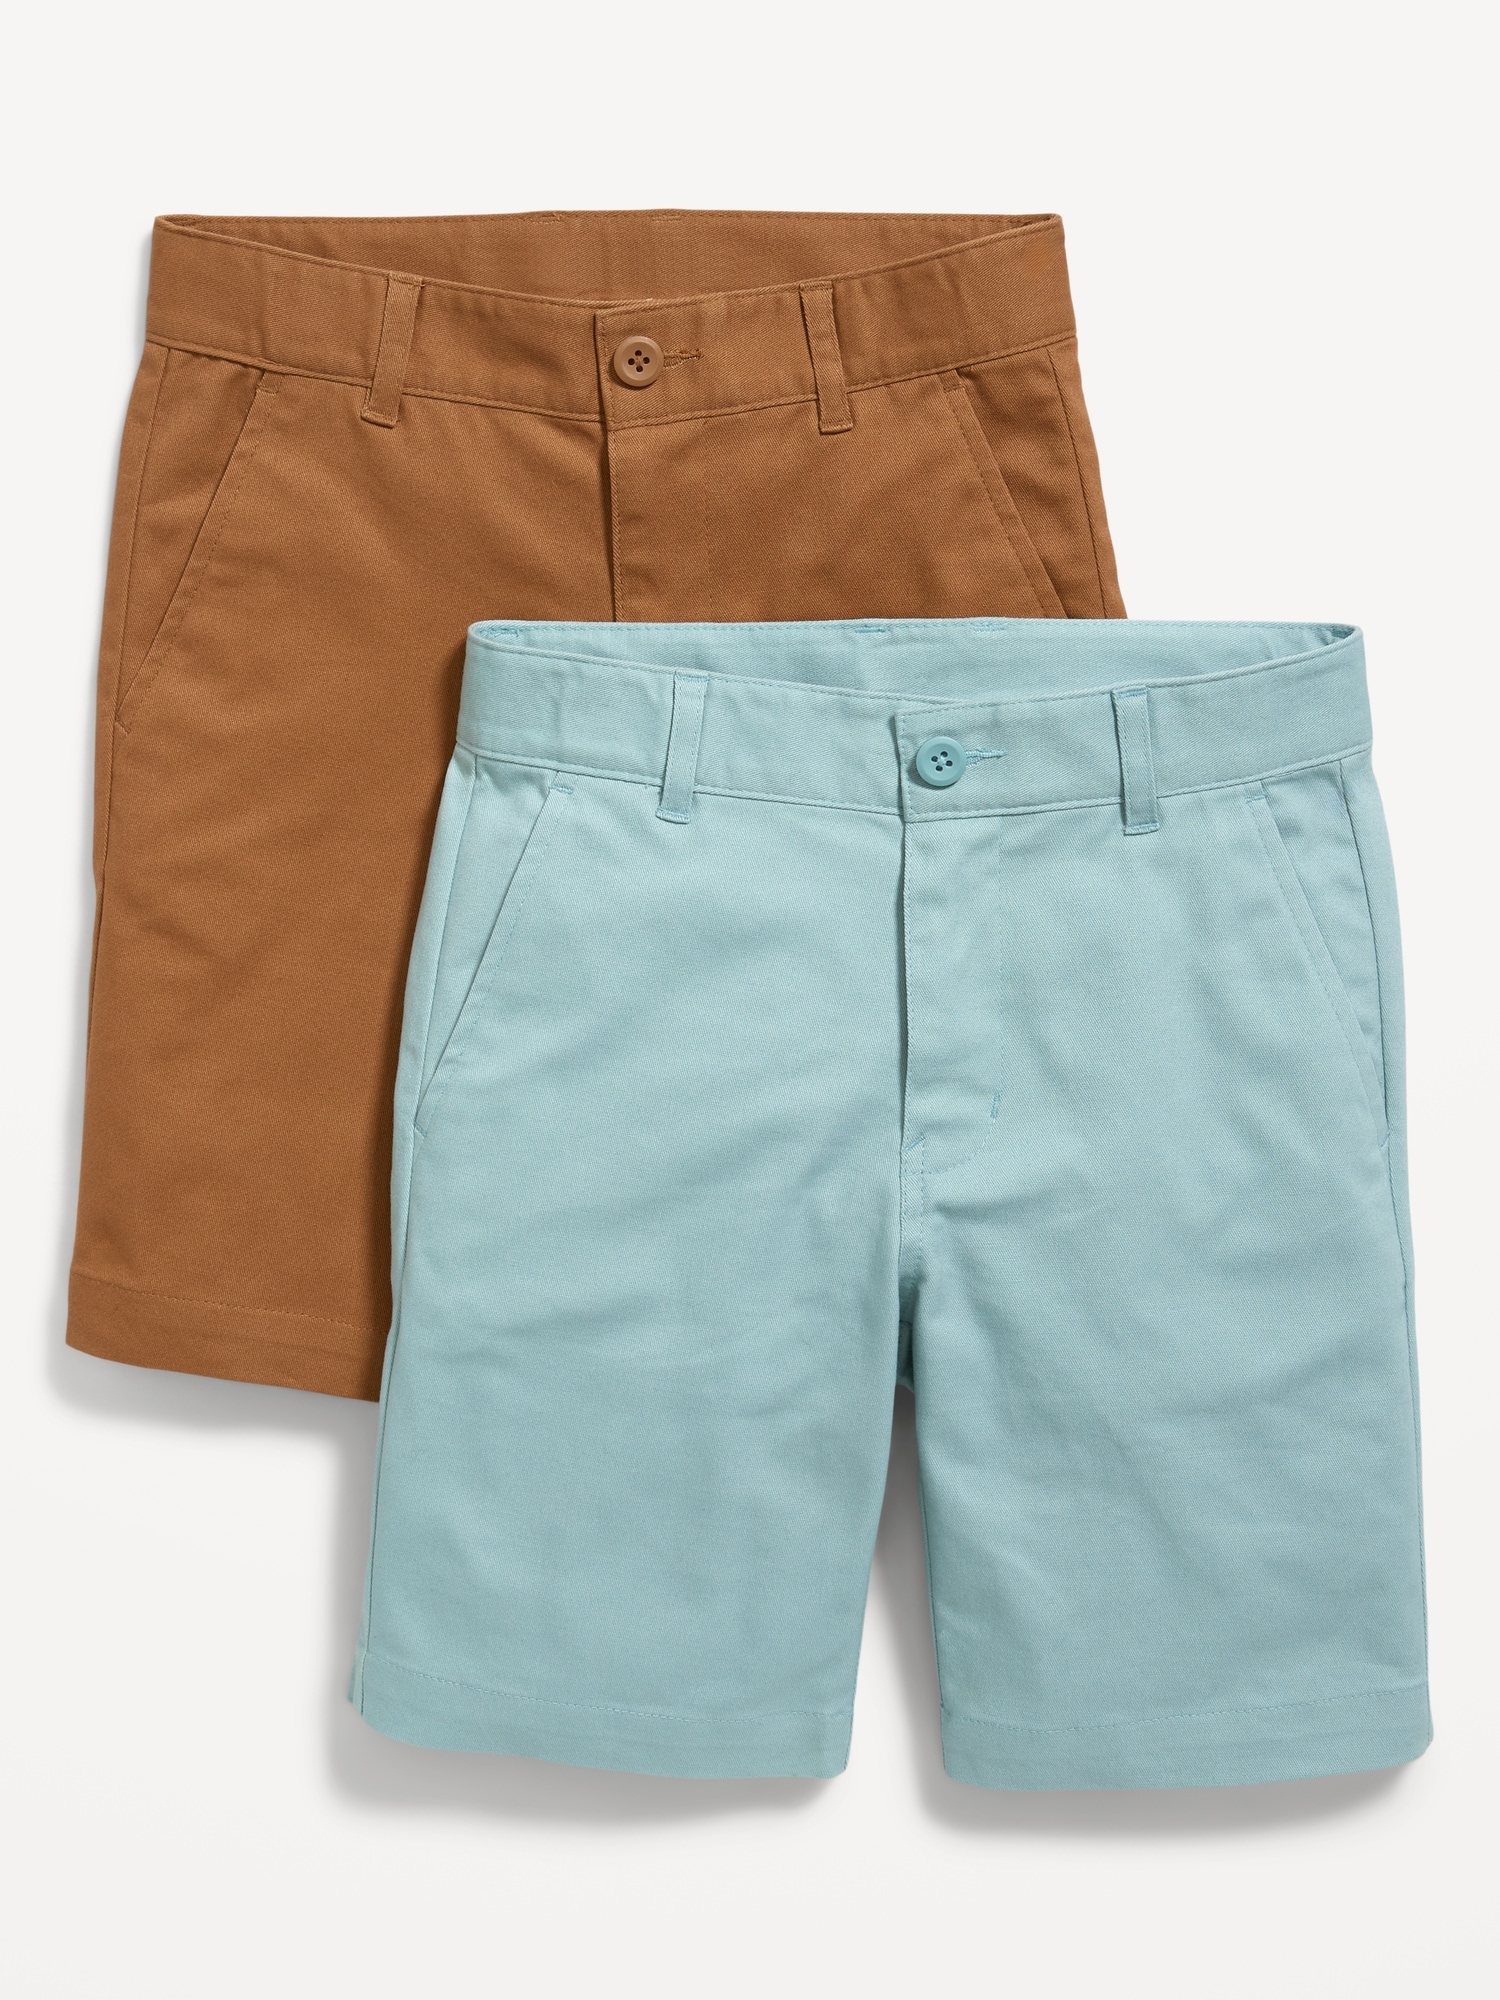 Knee Length Twill Shorts 2-Pack for Boys